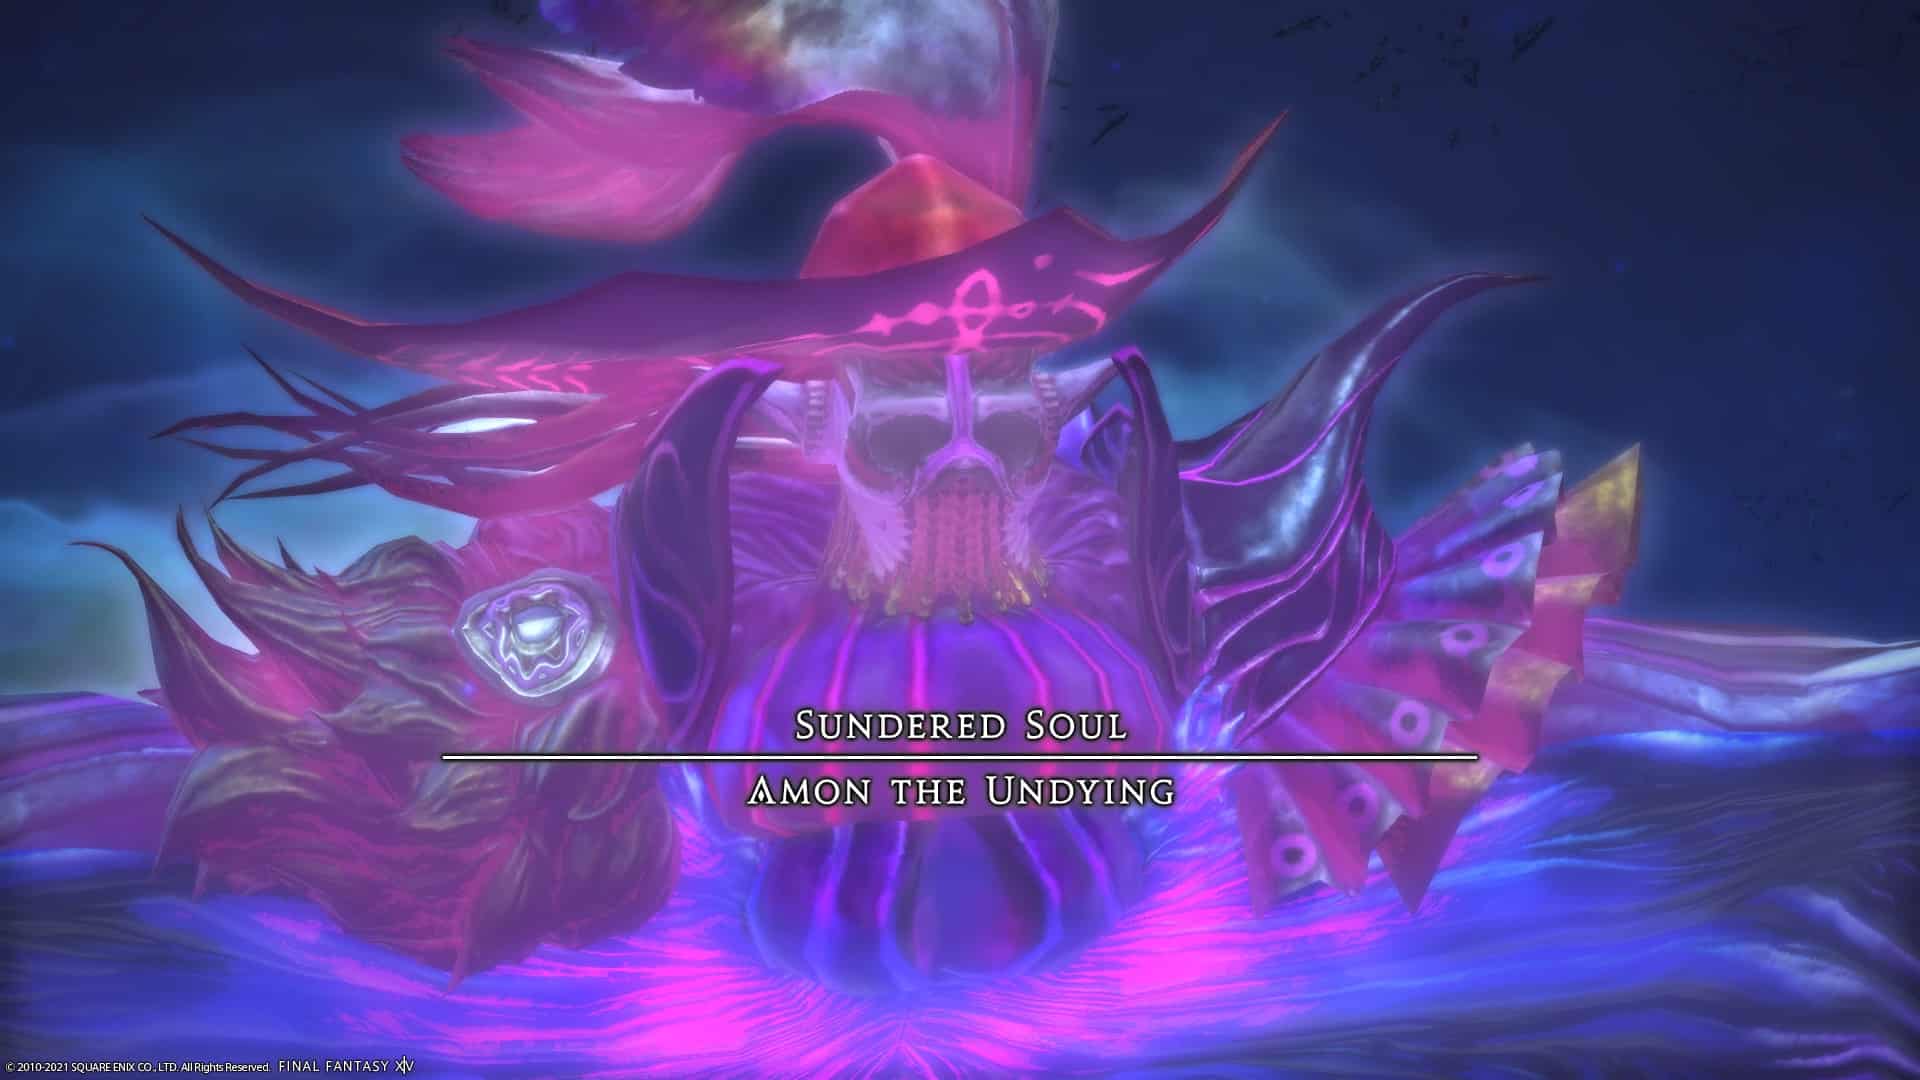 FFXIV screenshot showing Amon the Undying